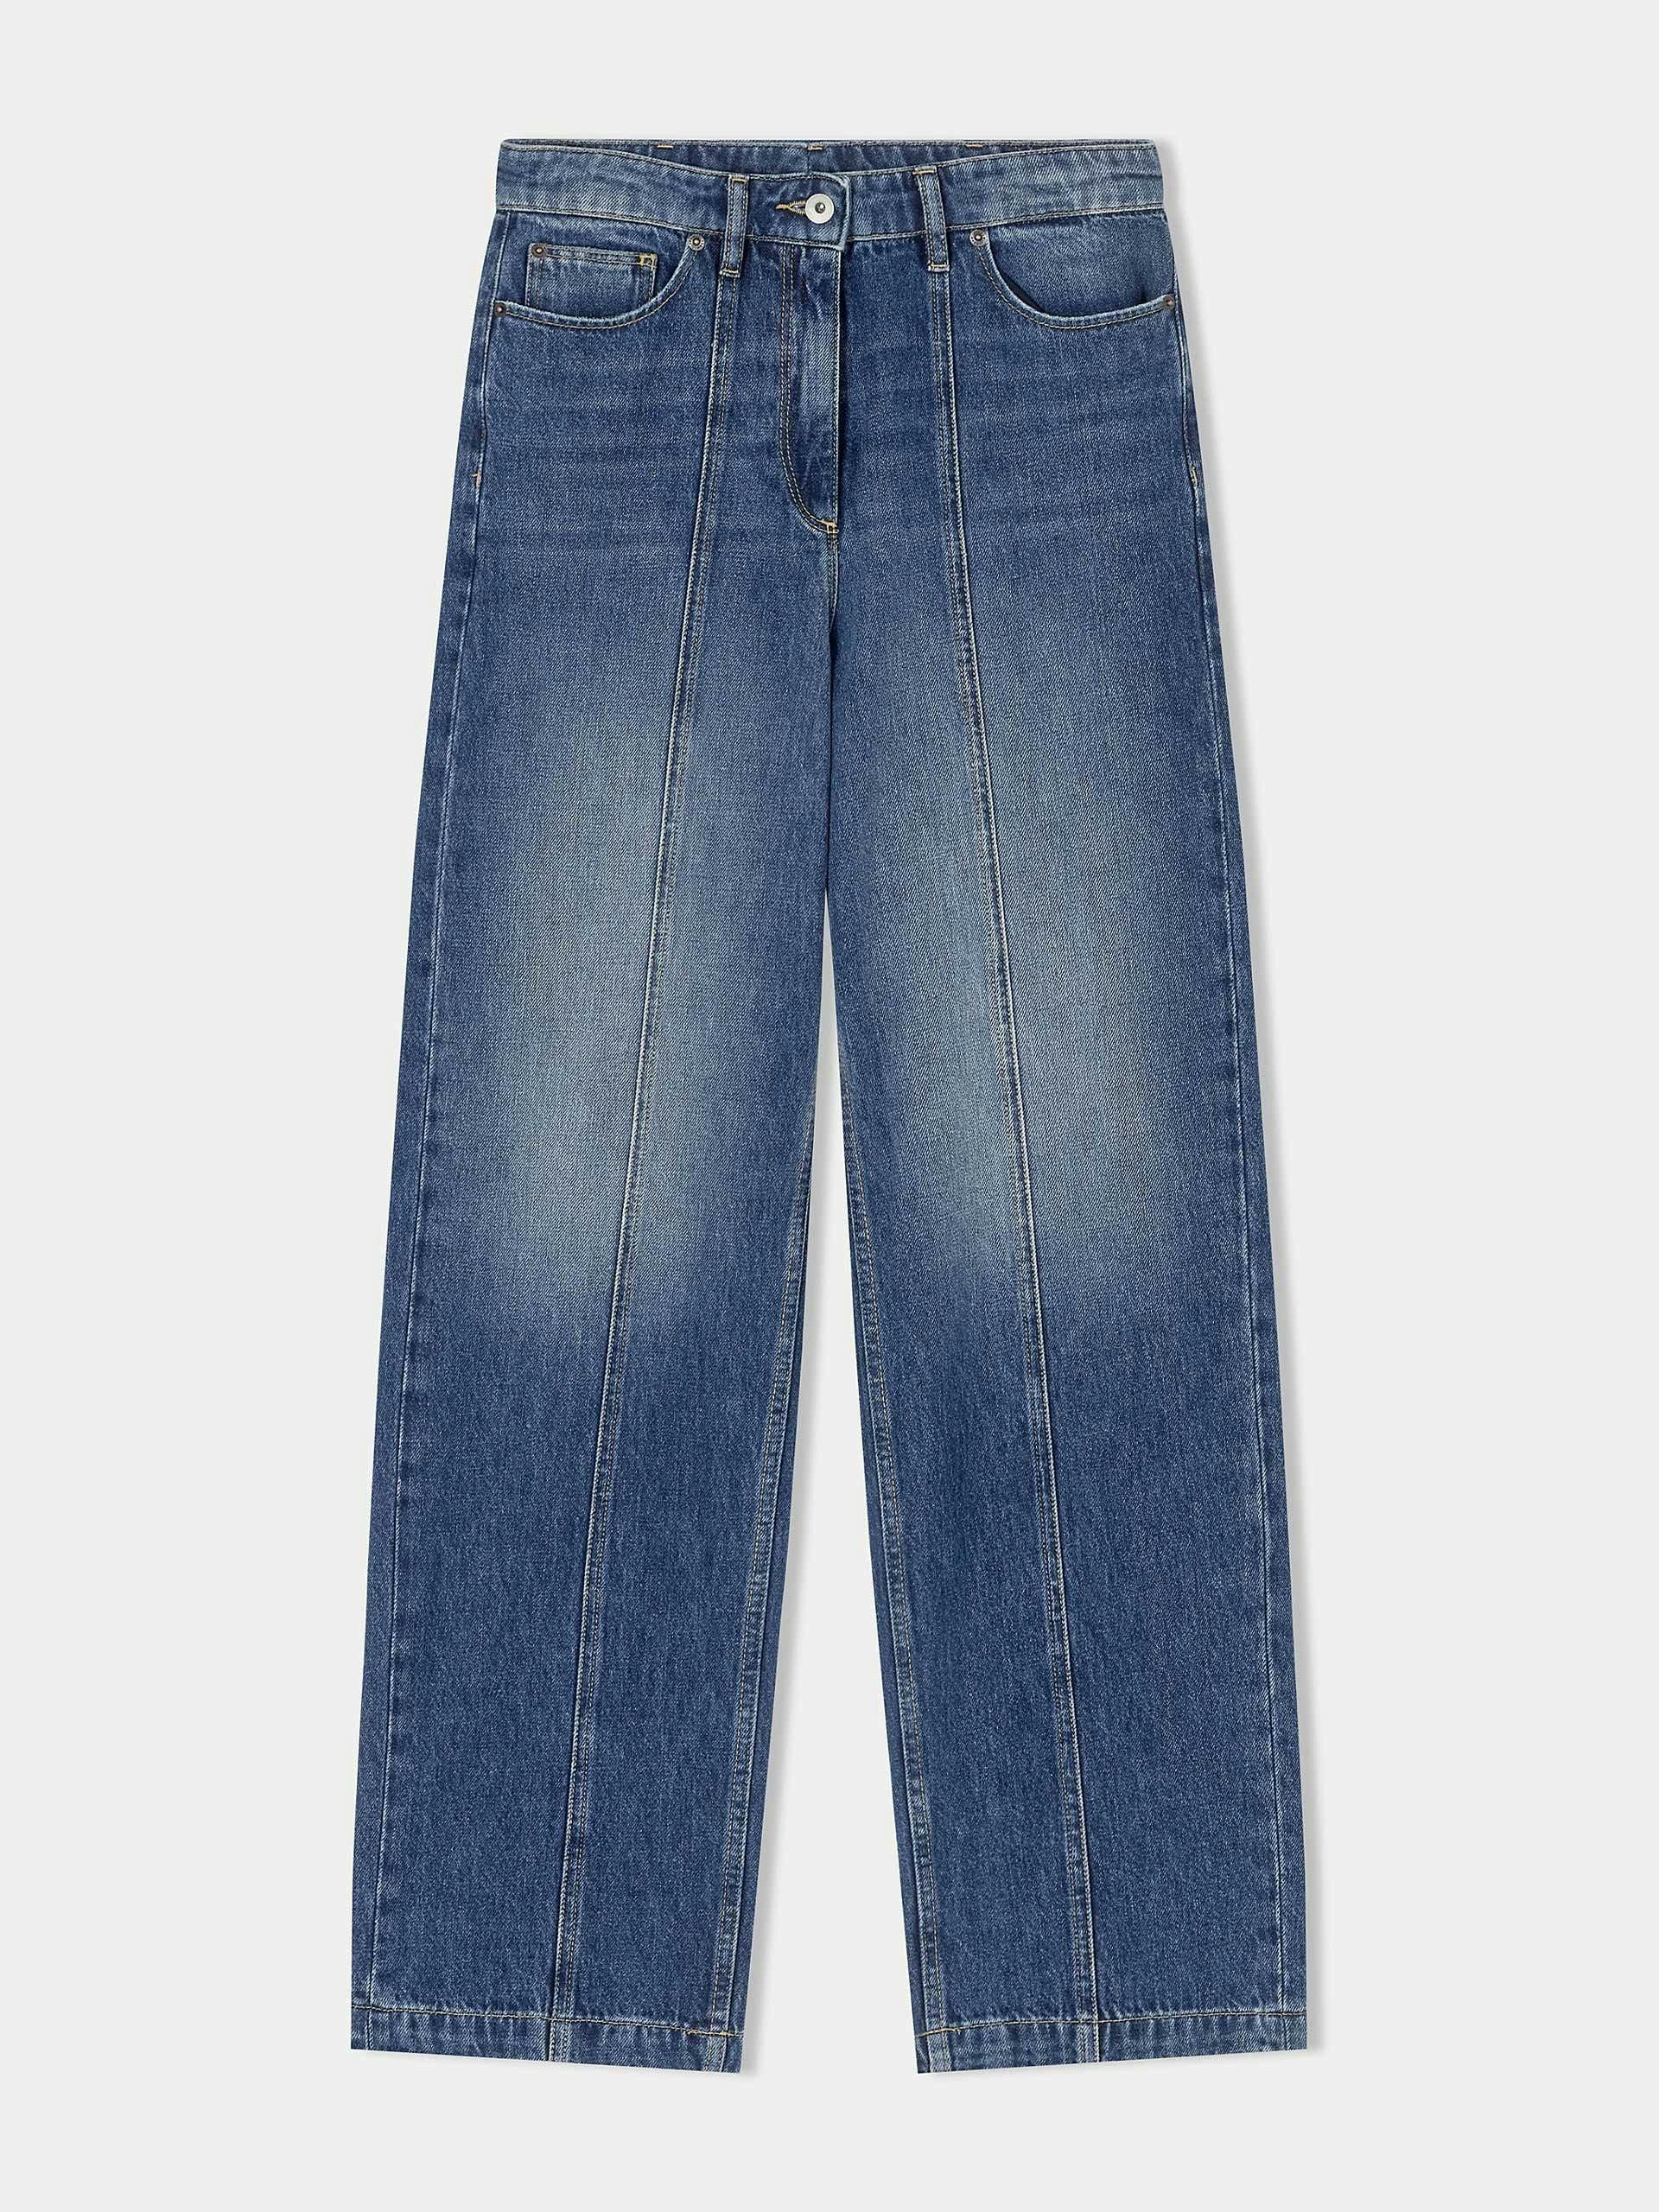 Tailored loose leg jeans